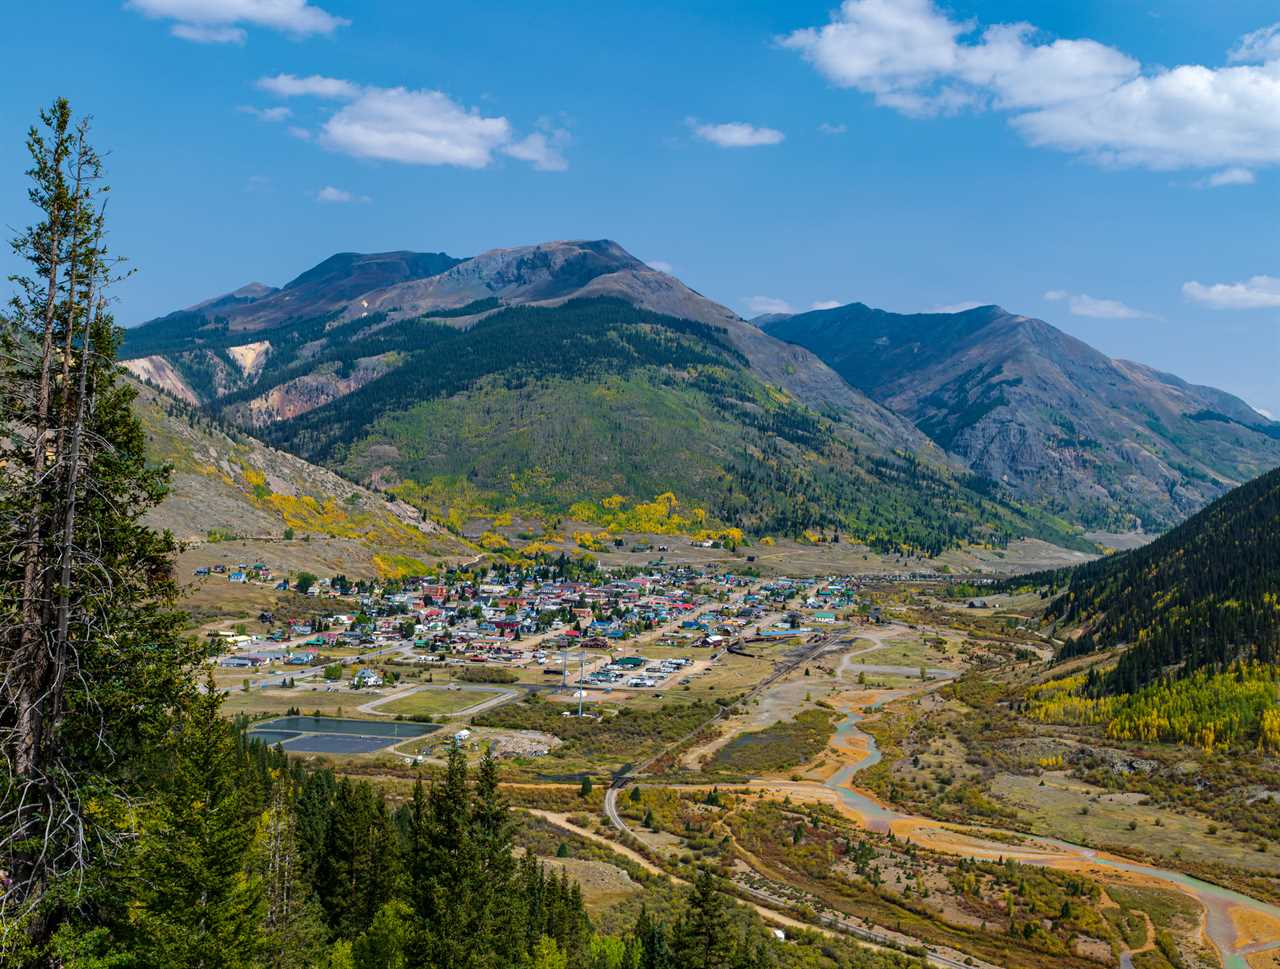 View of small town from high elevation amid high mountain peaks.